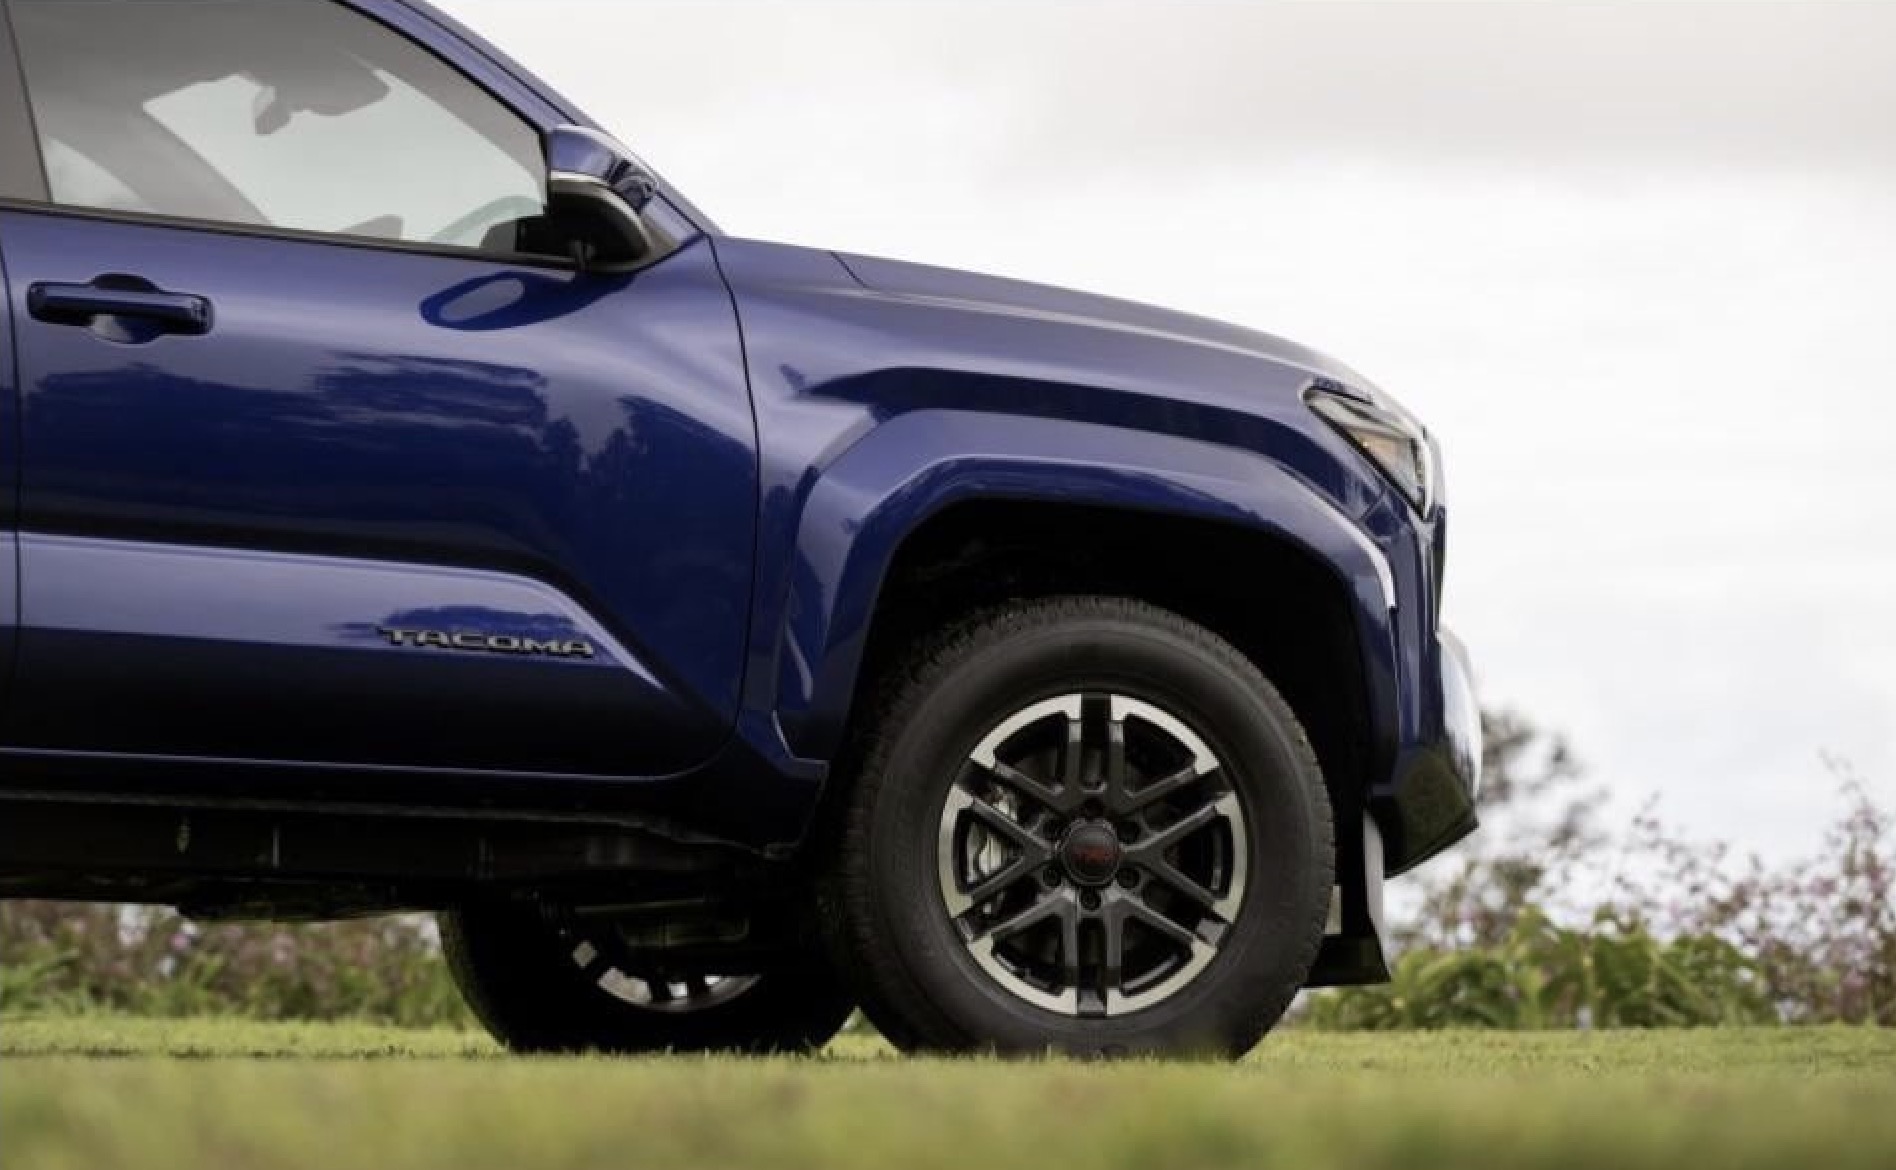 2024 Tacoma 2024 TACOMA REVEALED!! Specs, Wallpapers, Photos / Videos! Hybrid Model Added Screenshot 2023-05-18 at 2.13.59 PM